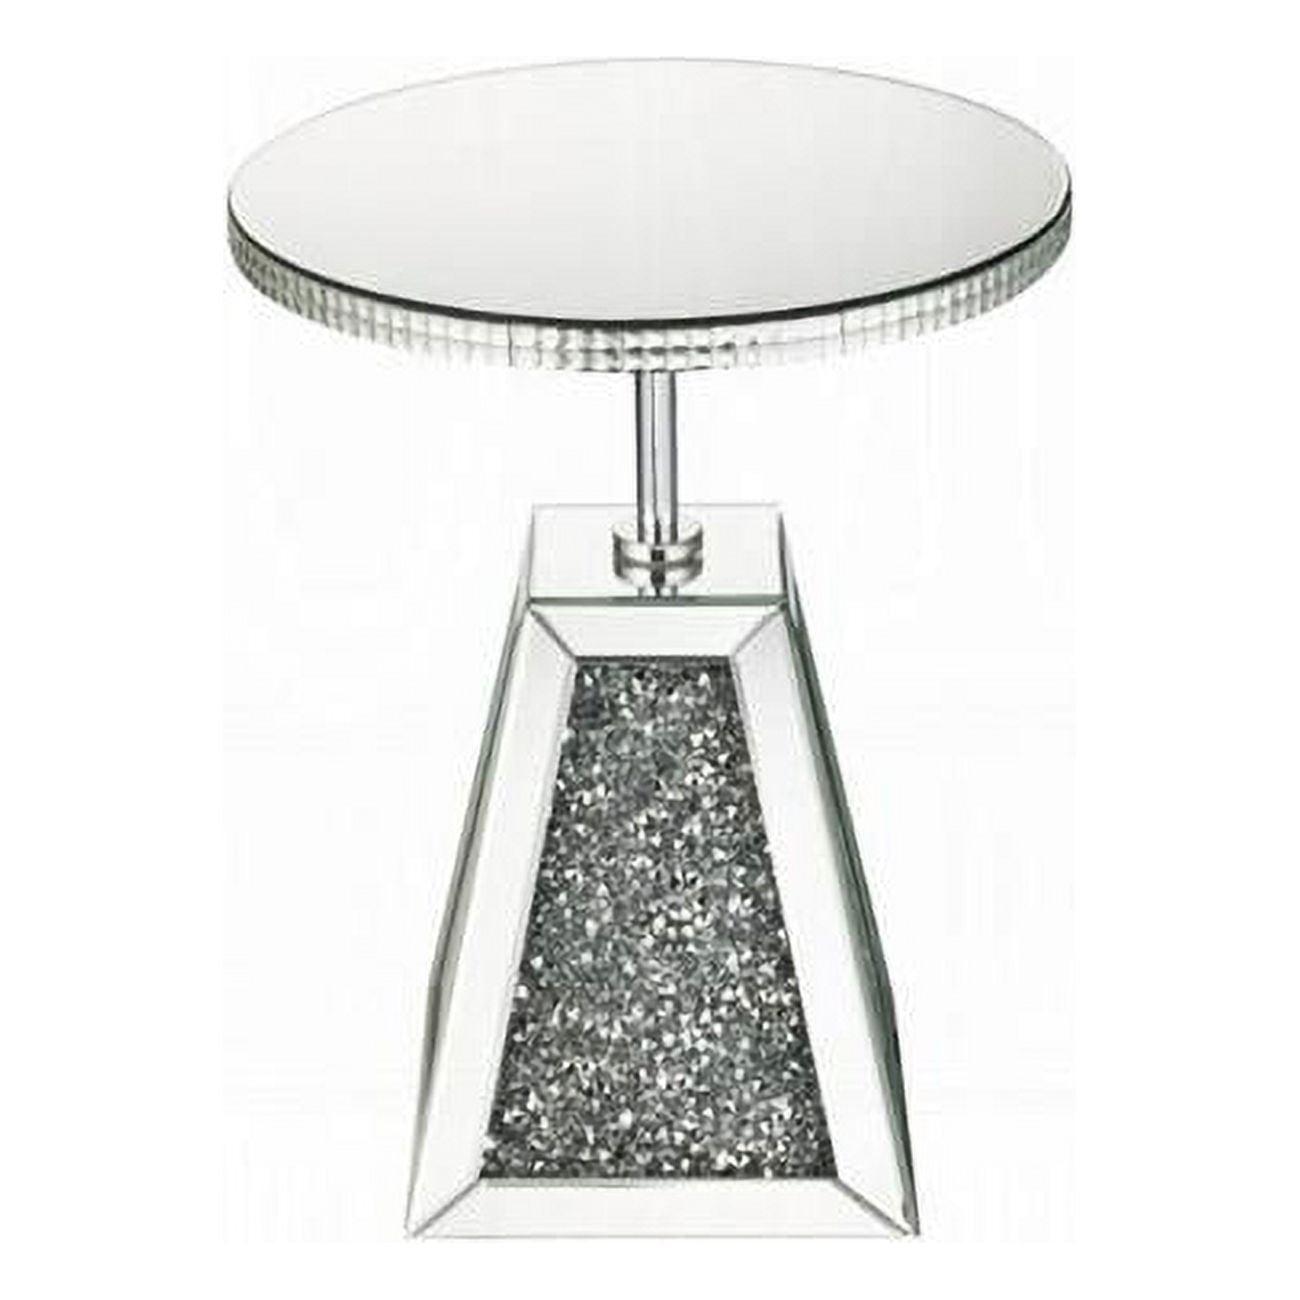 Elegant Round Wood & Glass Mirrored Accent Table